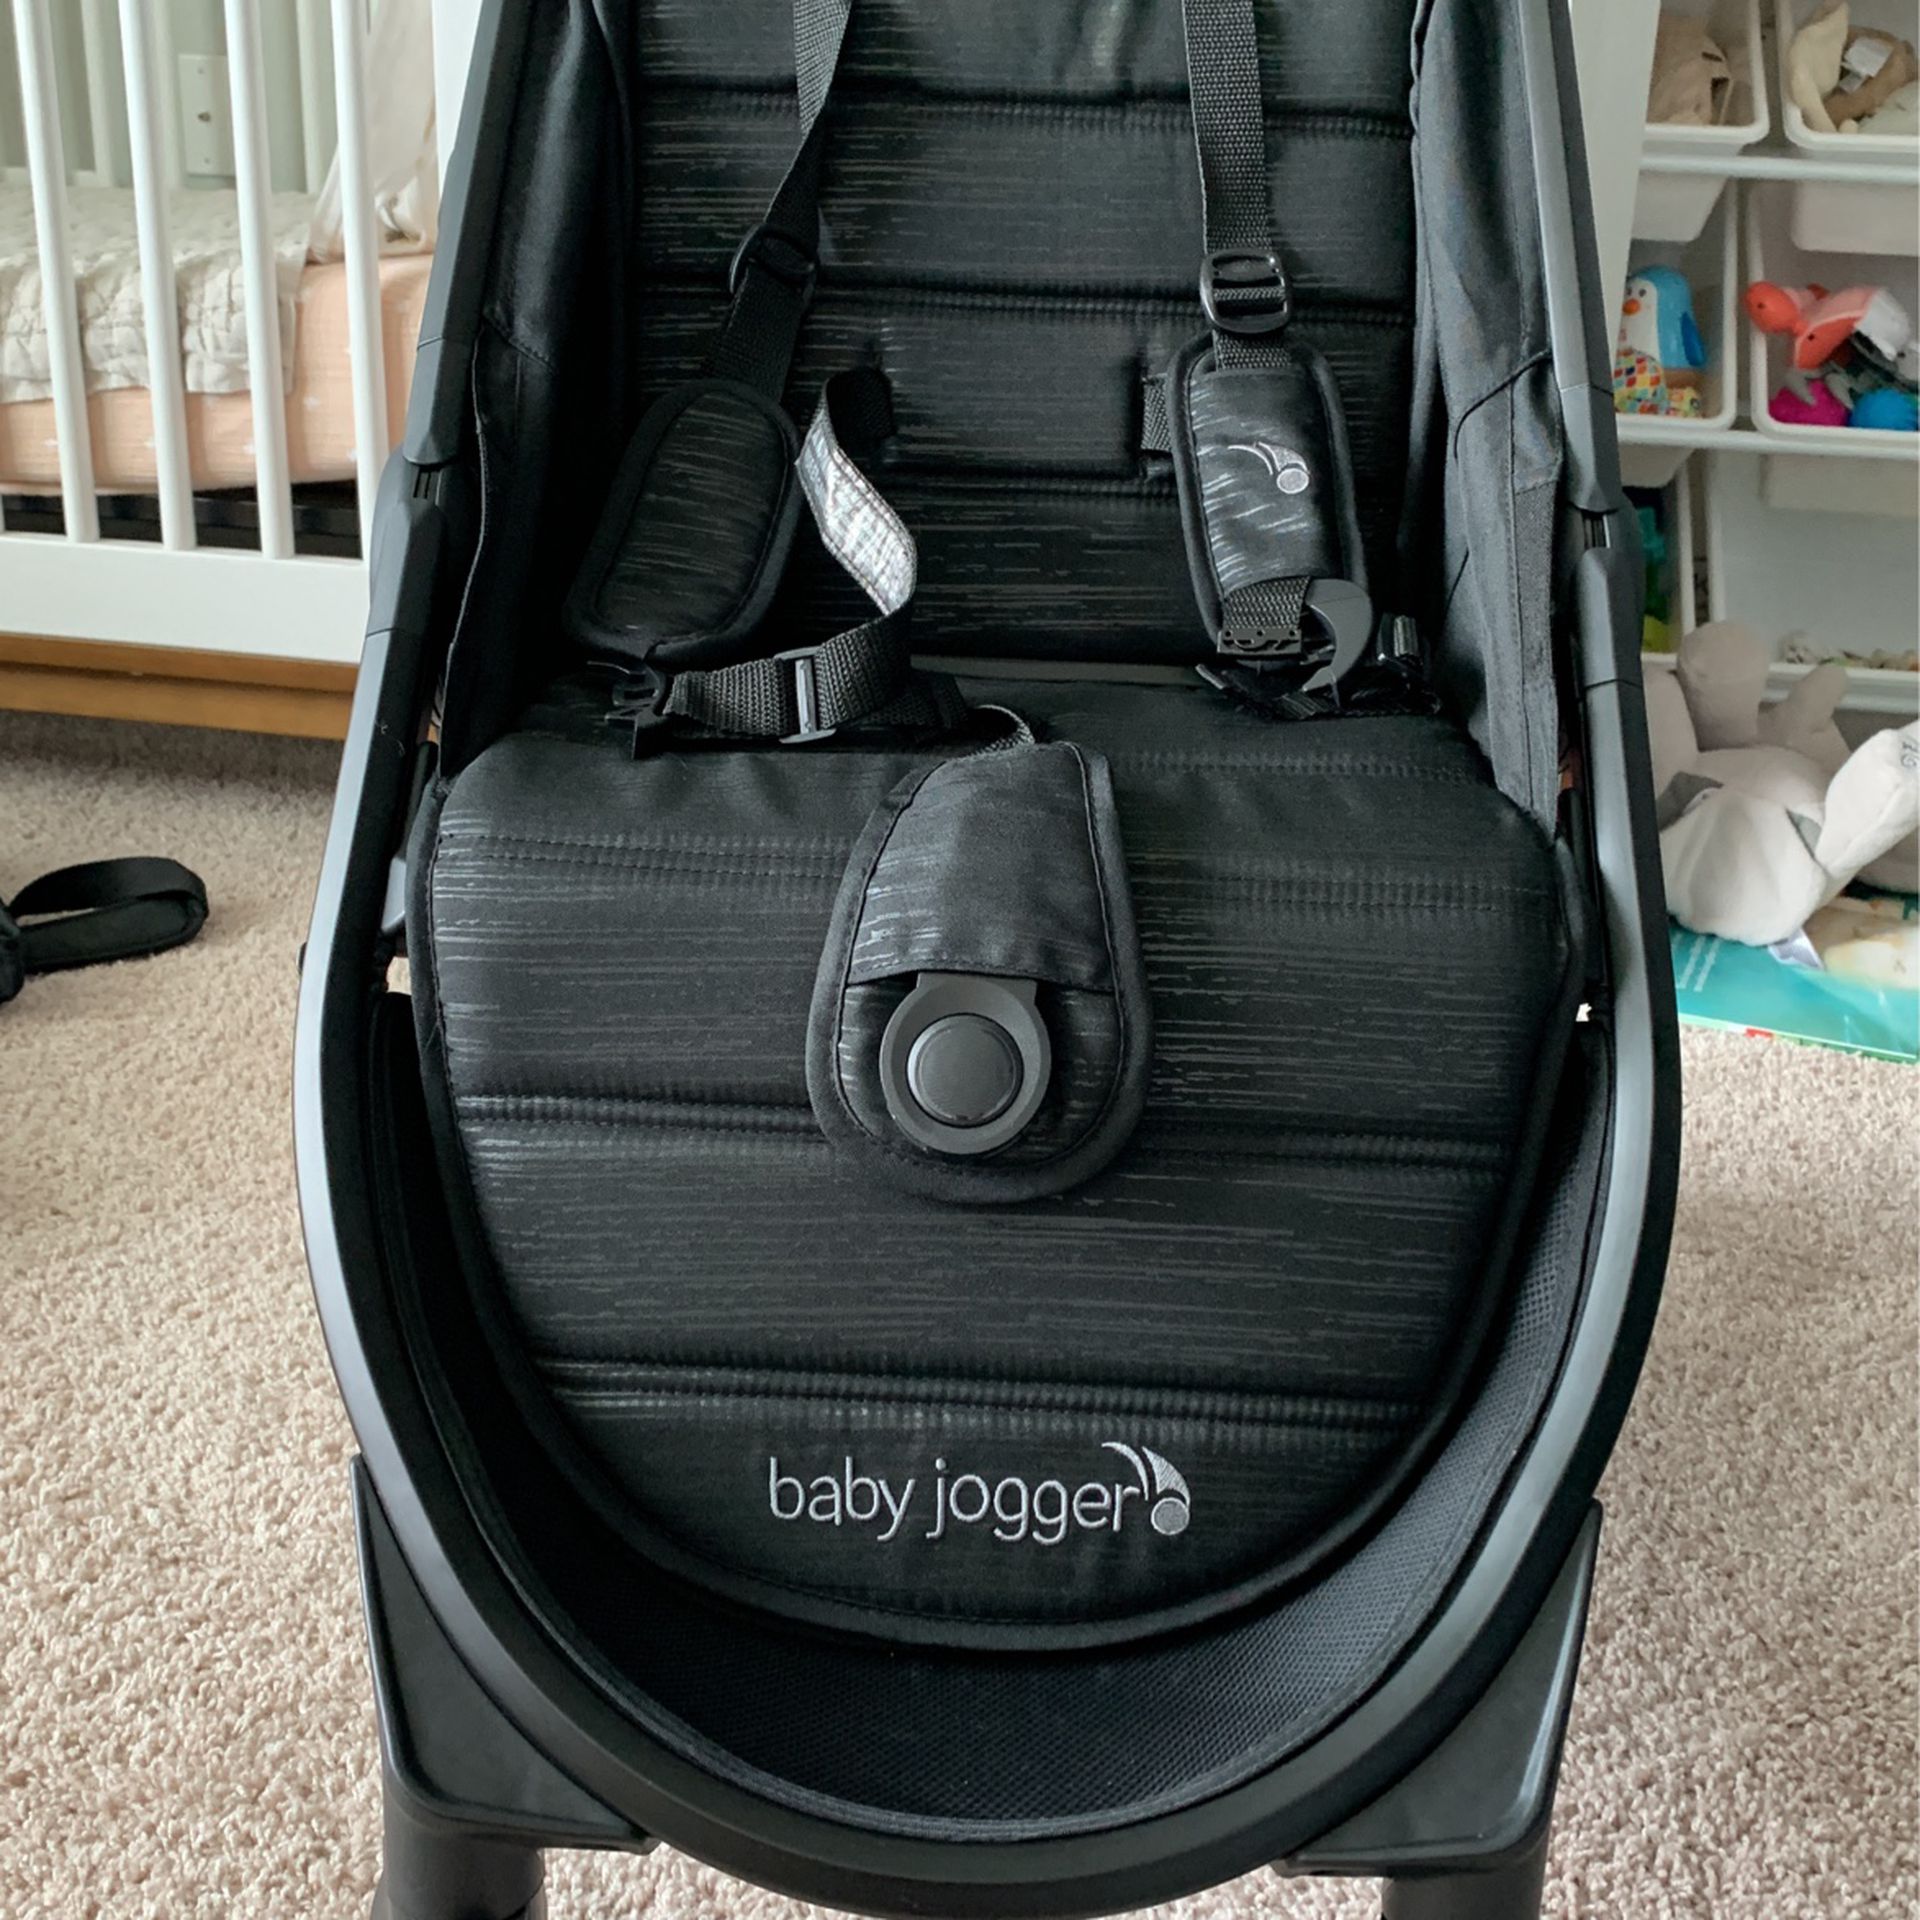 NEW Baby Jogger Stroller With Travel Bag